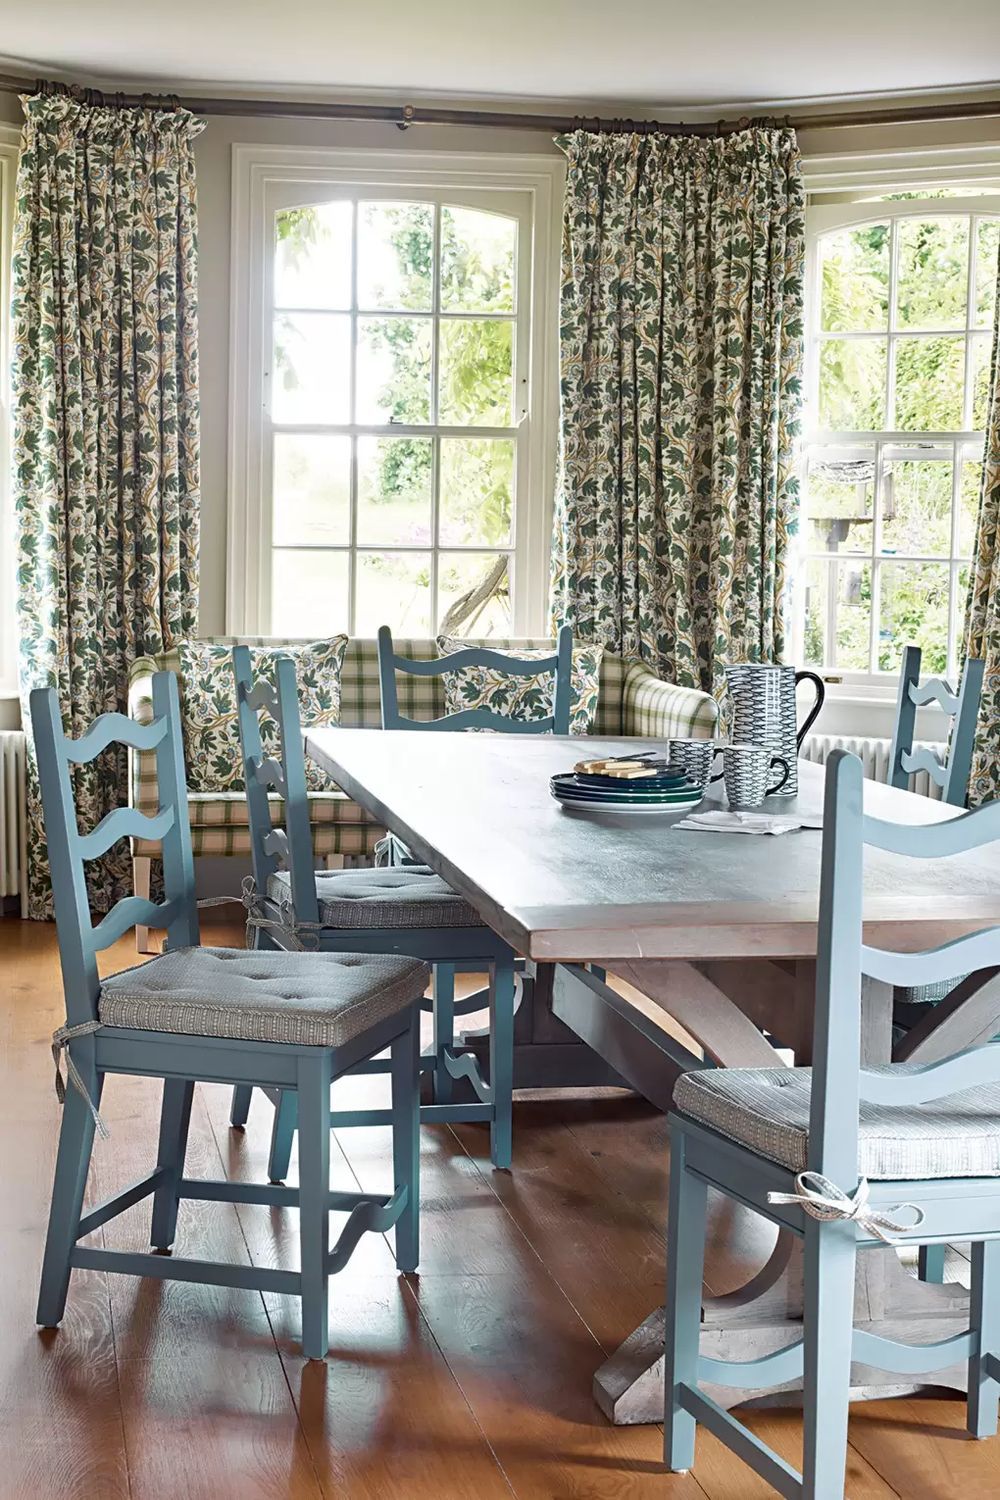 English Country Dining Room via Rupert and Anna Bradstock